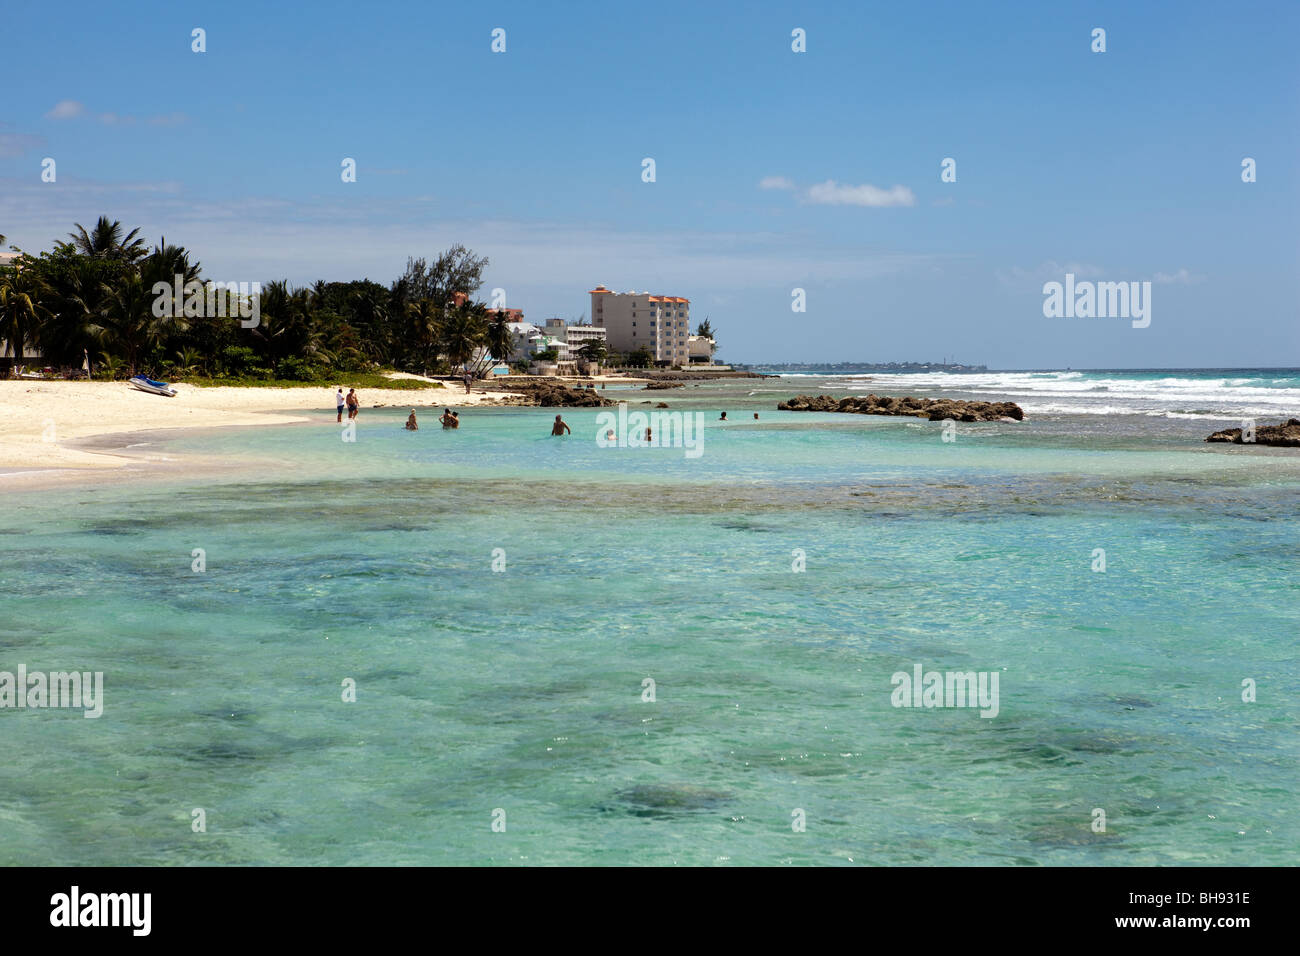 View from Needham Point towards Rockley Beach on the Caribbean island of Barbados Stock Photo